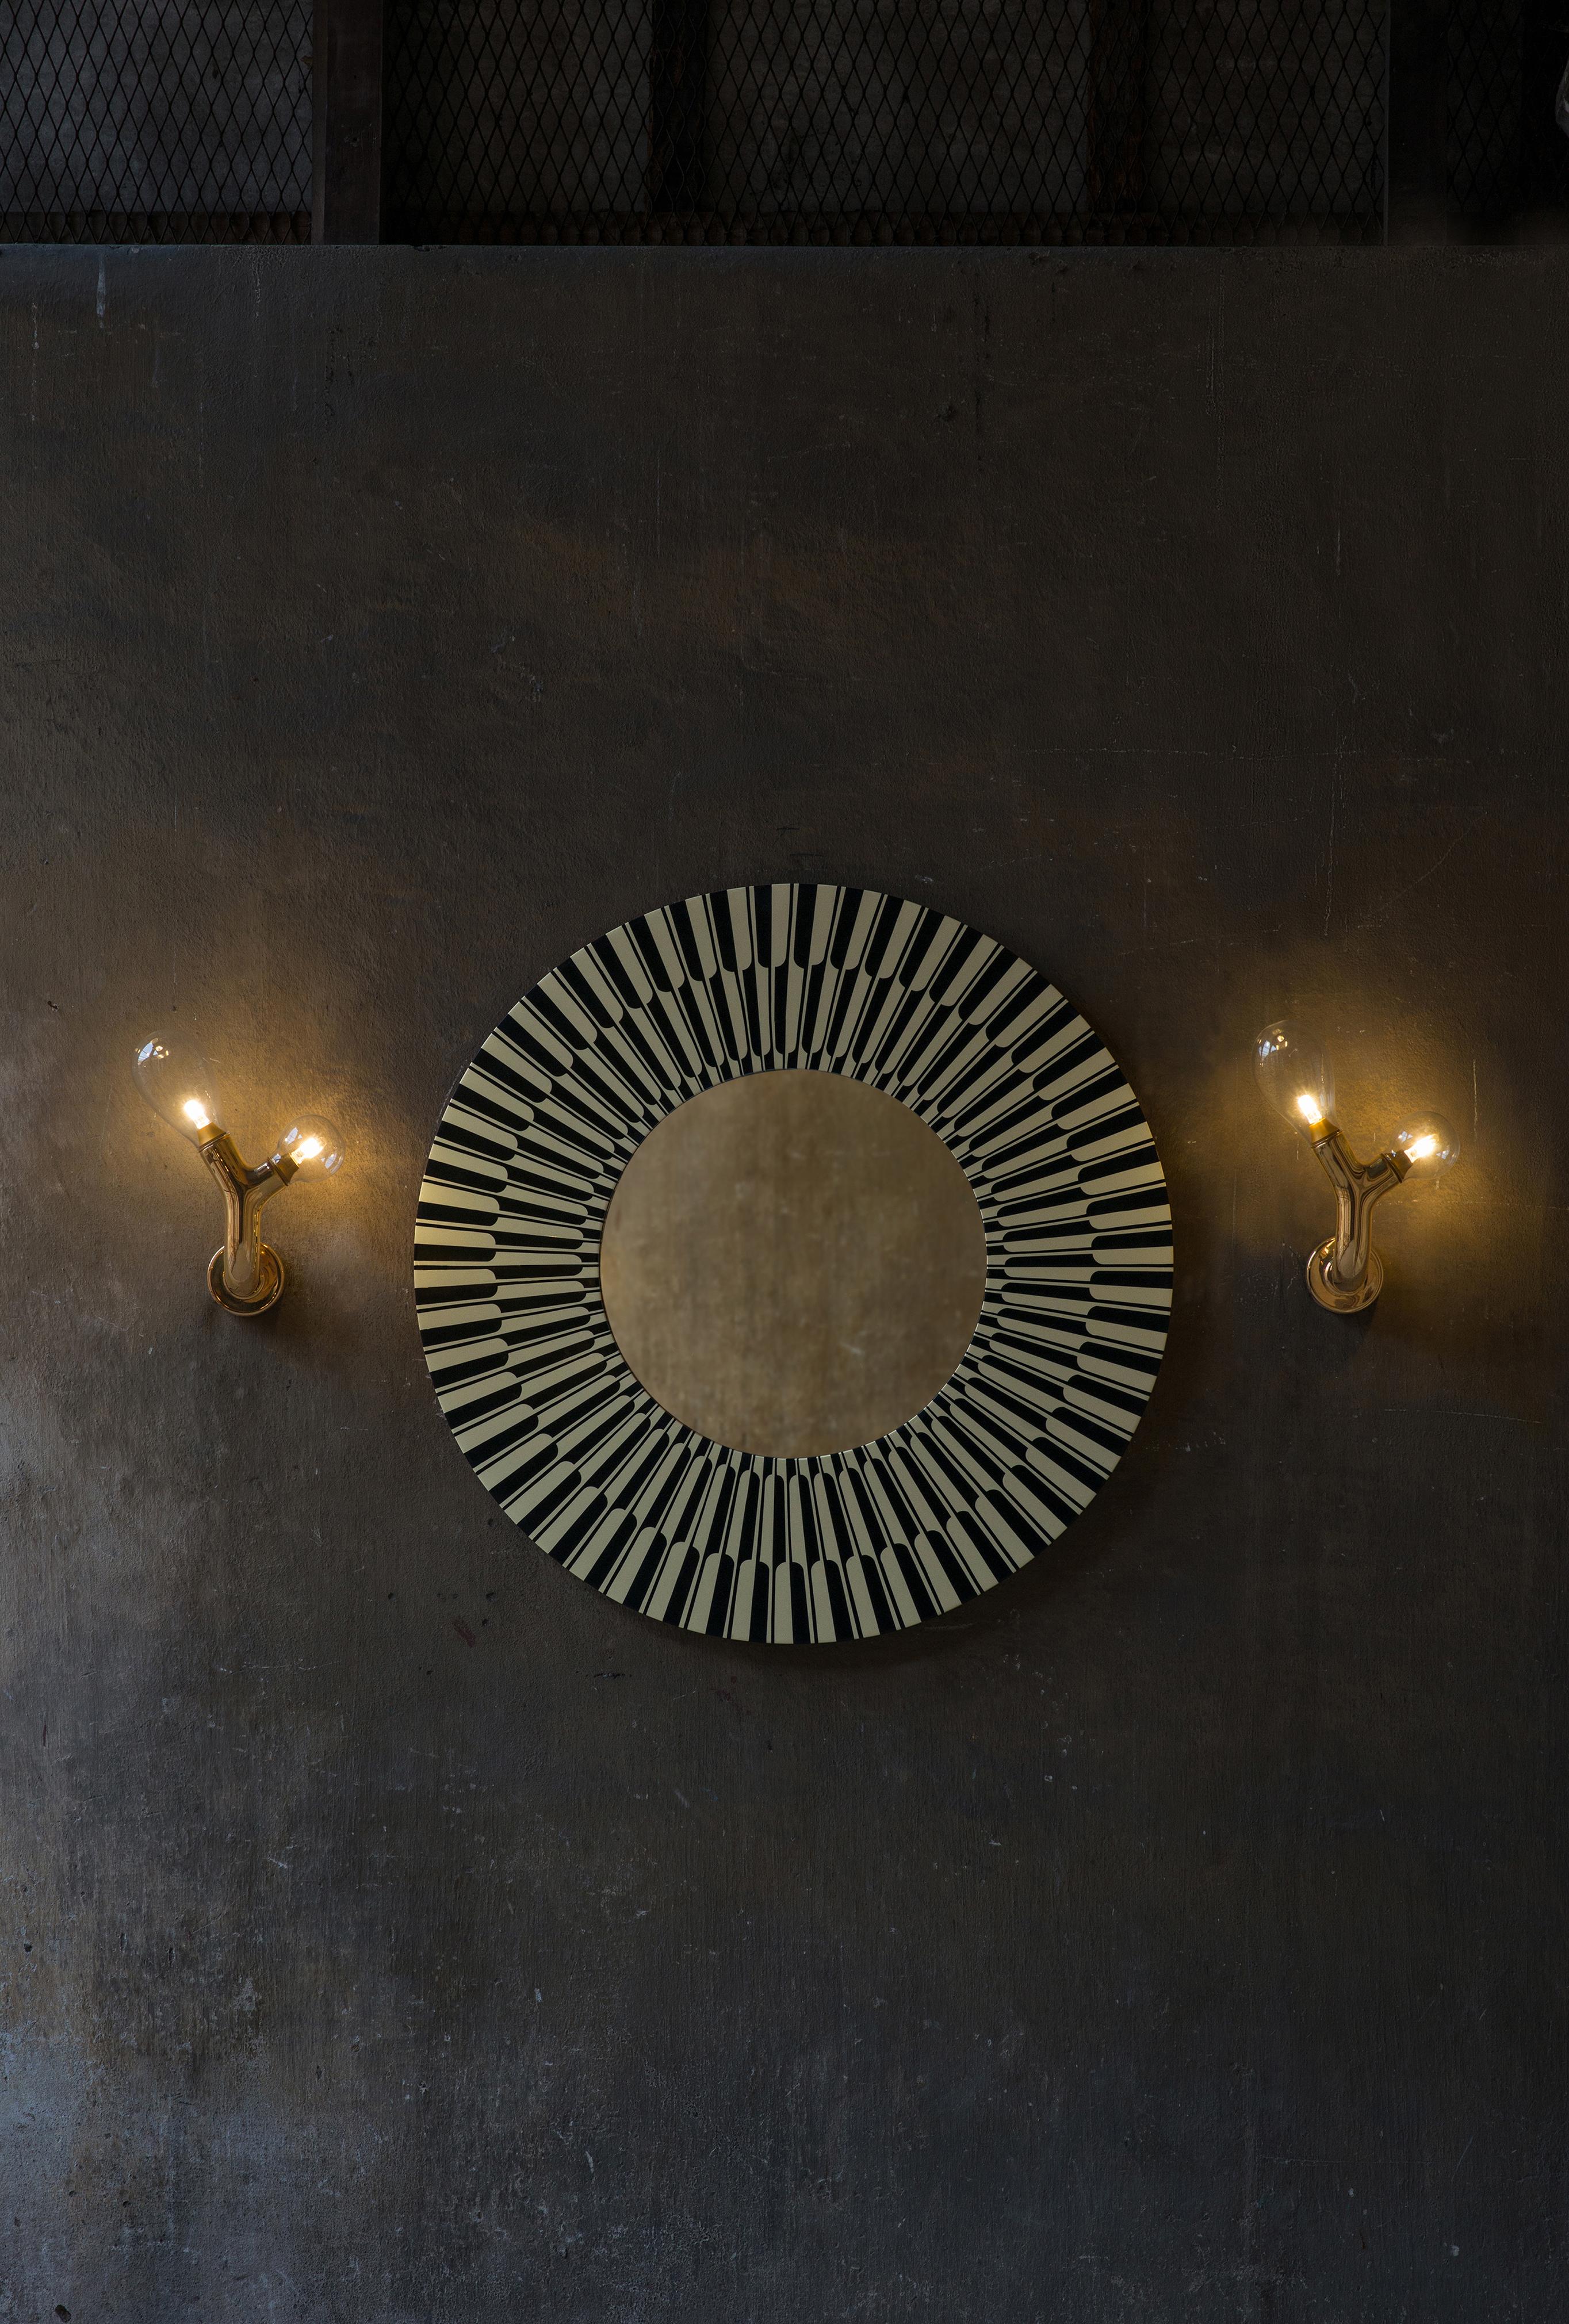 Citylights Wall Console Mirror Black and White by Matteo Cibic is a stunning large circular mirror.

India's handicrafts are as multifarious as its cultures and as rich as its history. The art of bone and horn inlay is omnipresent here. Artisans